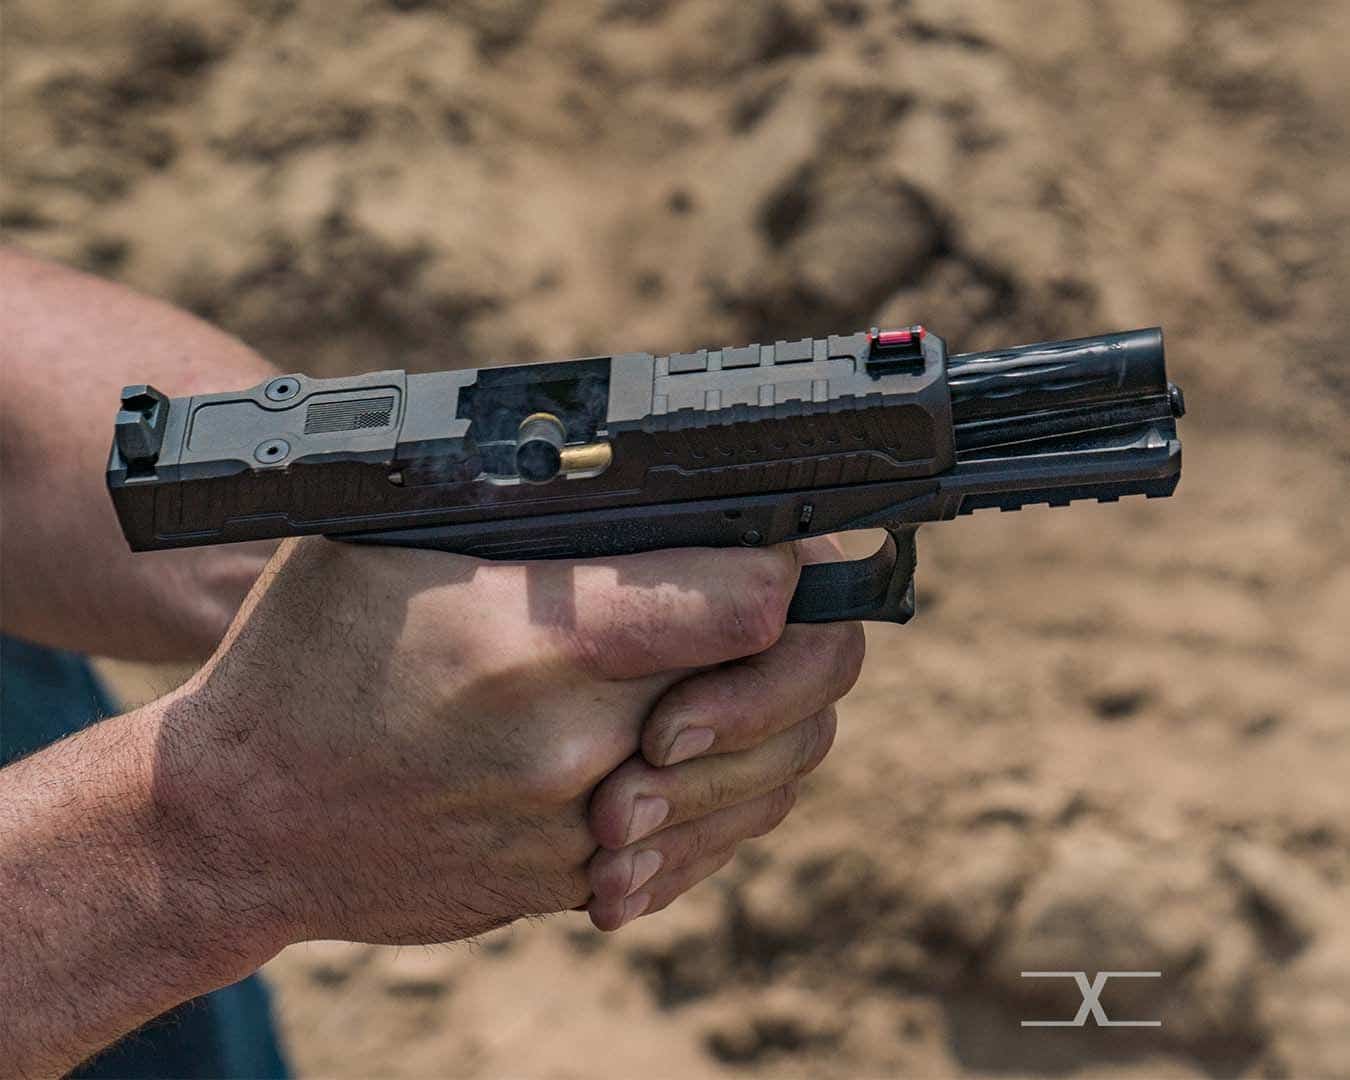 Definitive Guide To The Faxon Patriot G19 Slide